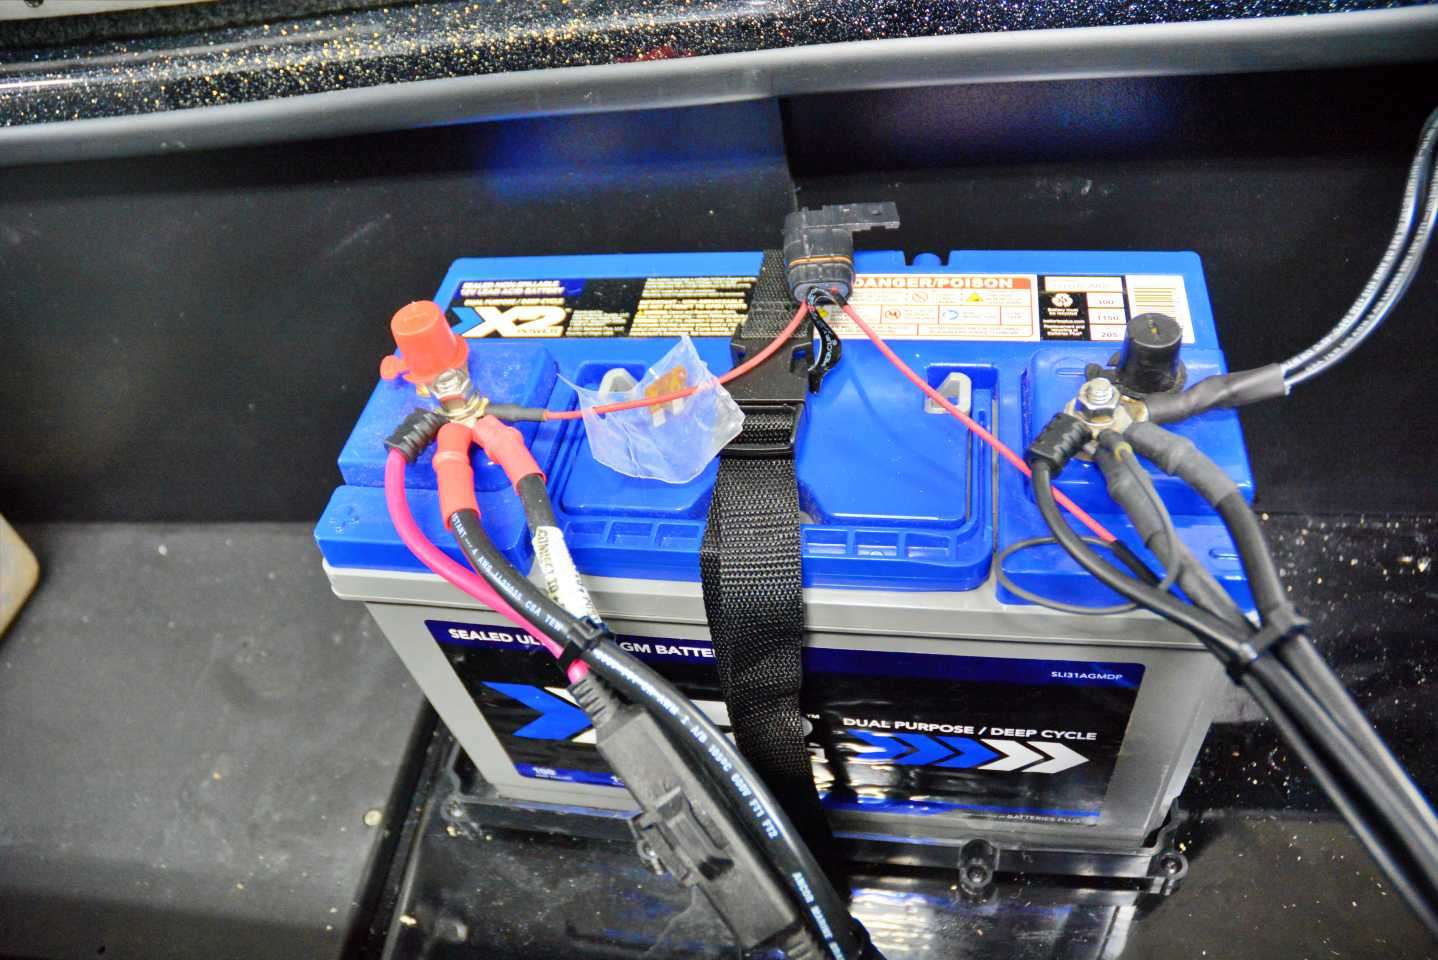 This is an X2 Power Group 31 AGM Dual Purpose, Deep Cycle 12-volt battery, featuring 1150 cold cranking amps, with capacity of 100-amp hours. Also rigged here is the custom-made Sonar Pros wiring harness, designed specifically for his boat. The harness provides dedicated power to the four units, for maximum performance.  